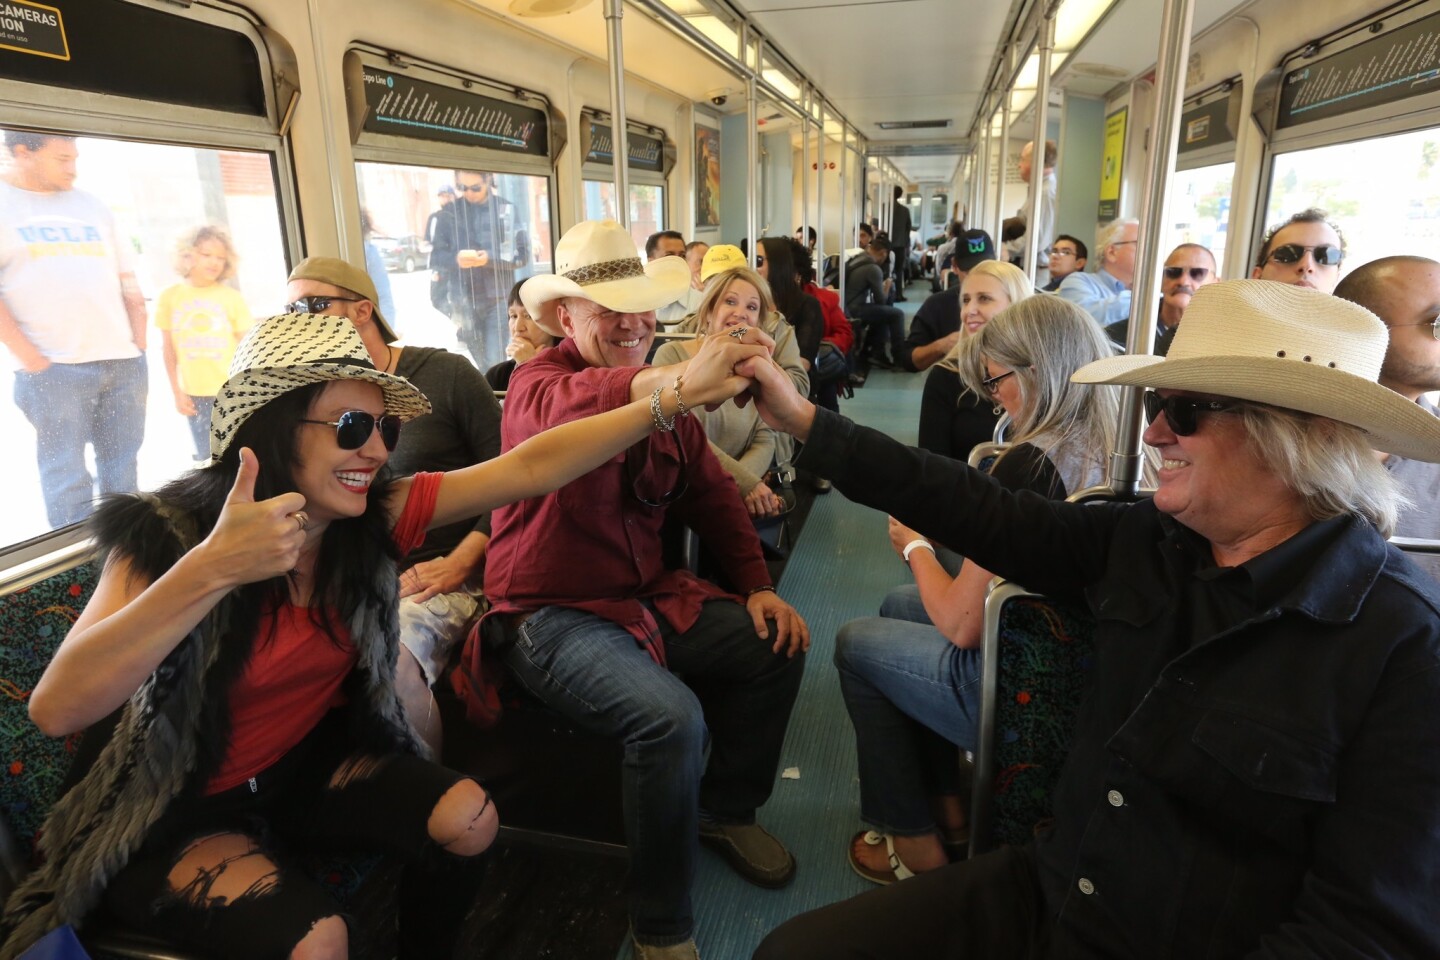 From left; Kat Herrera, Benjamin Hutto, and Brian O' Brien, all friends from Malibu, celebrate as the Expo Line leaves Santa Monica Station. They were heading to Los Angeles to celebrate O' Brien's 65th birthday.